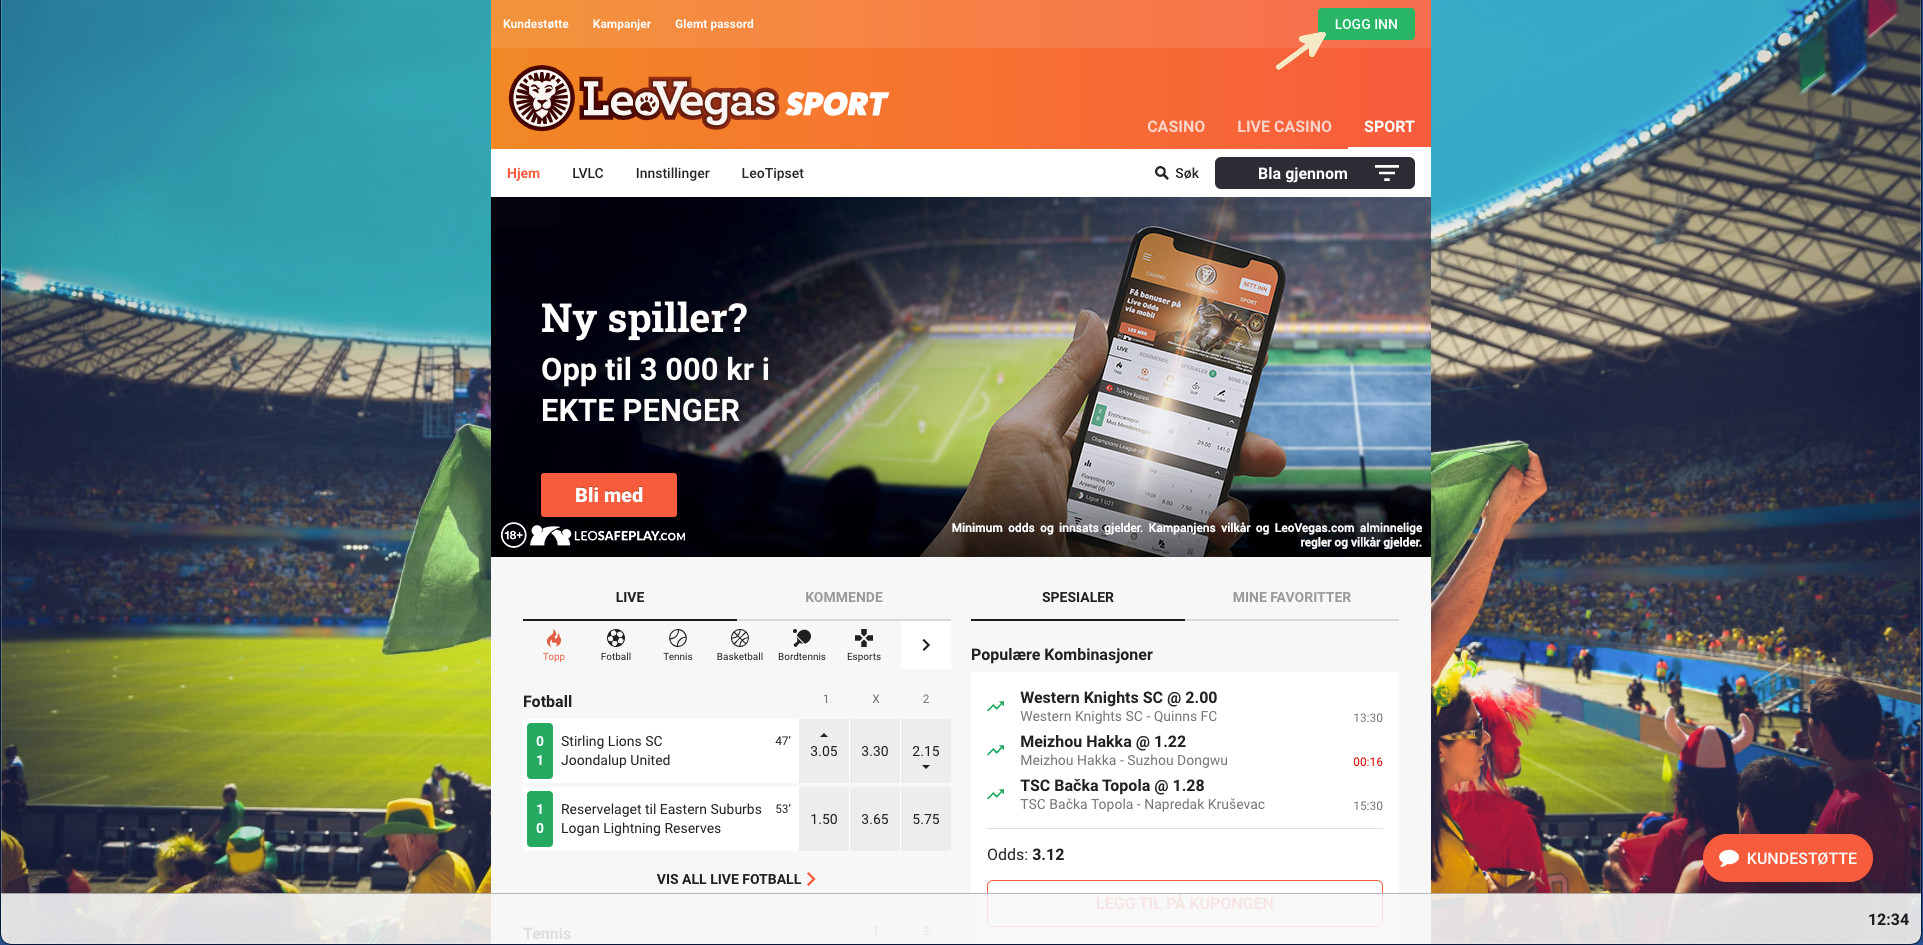 Choose one of the betting sites to register at